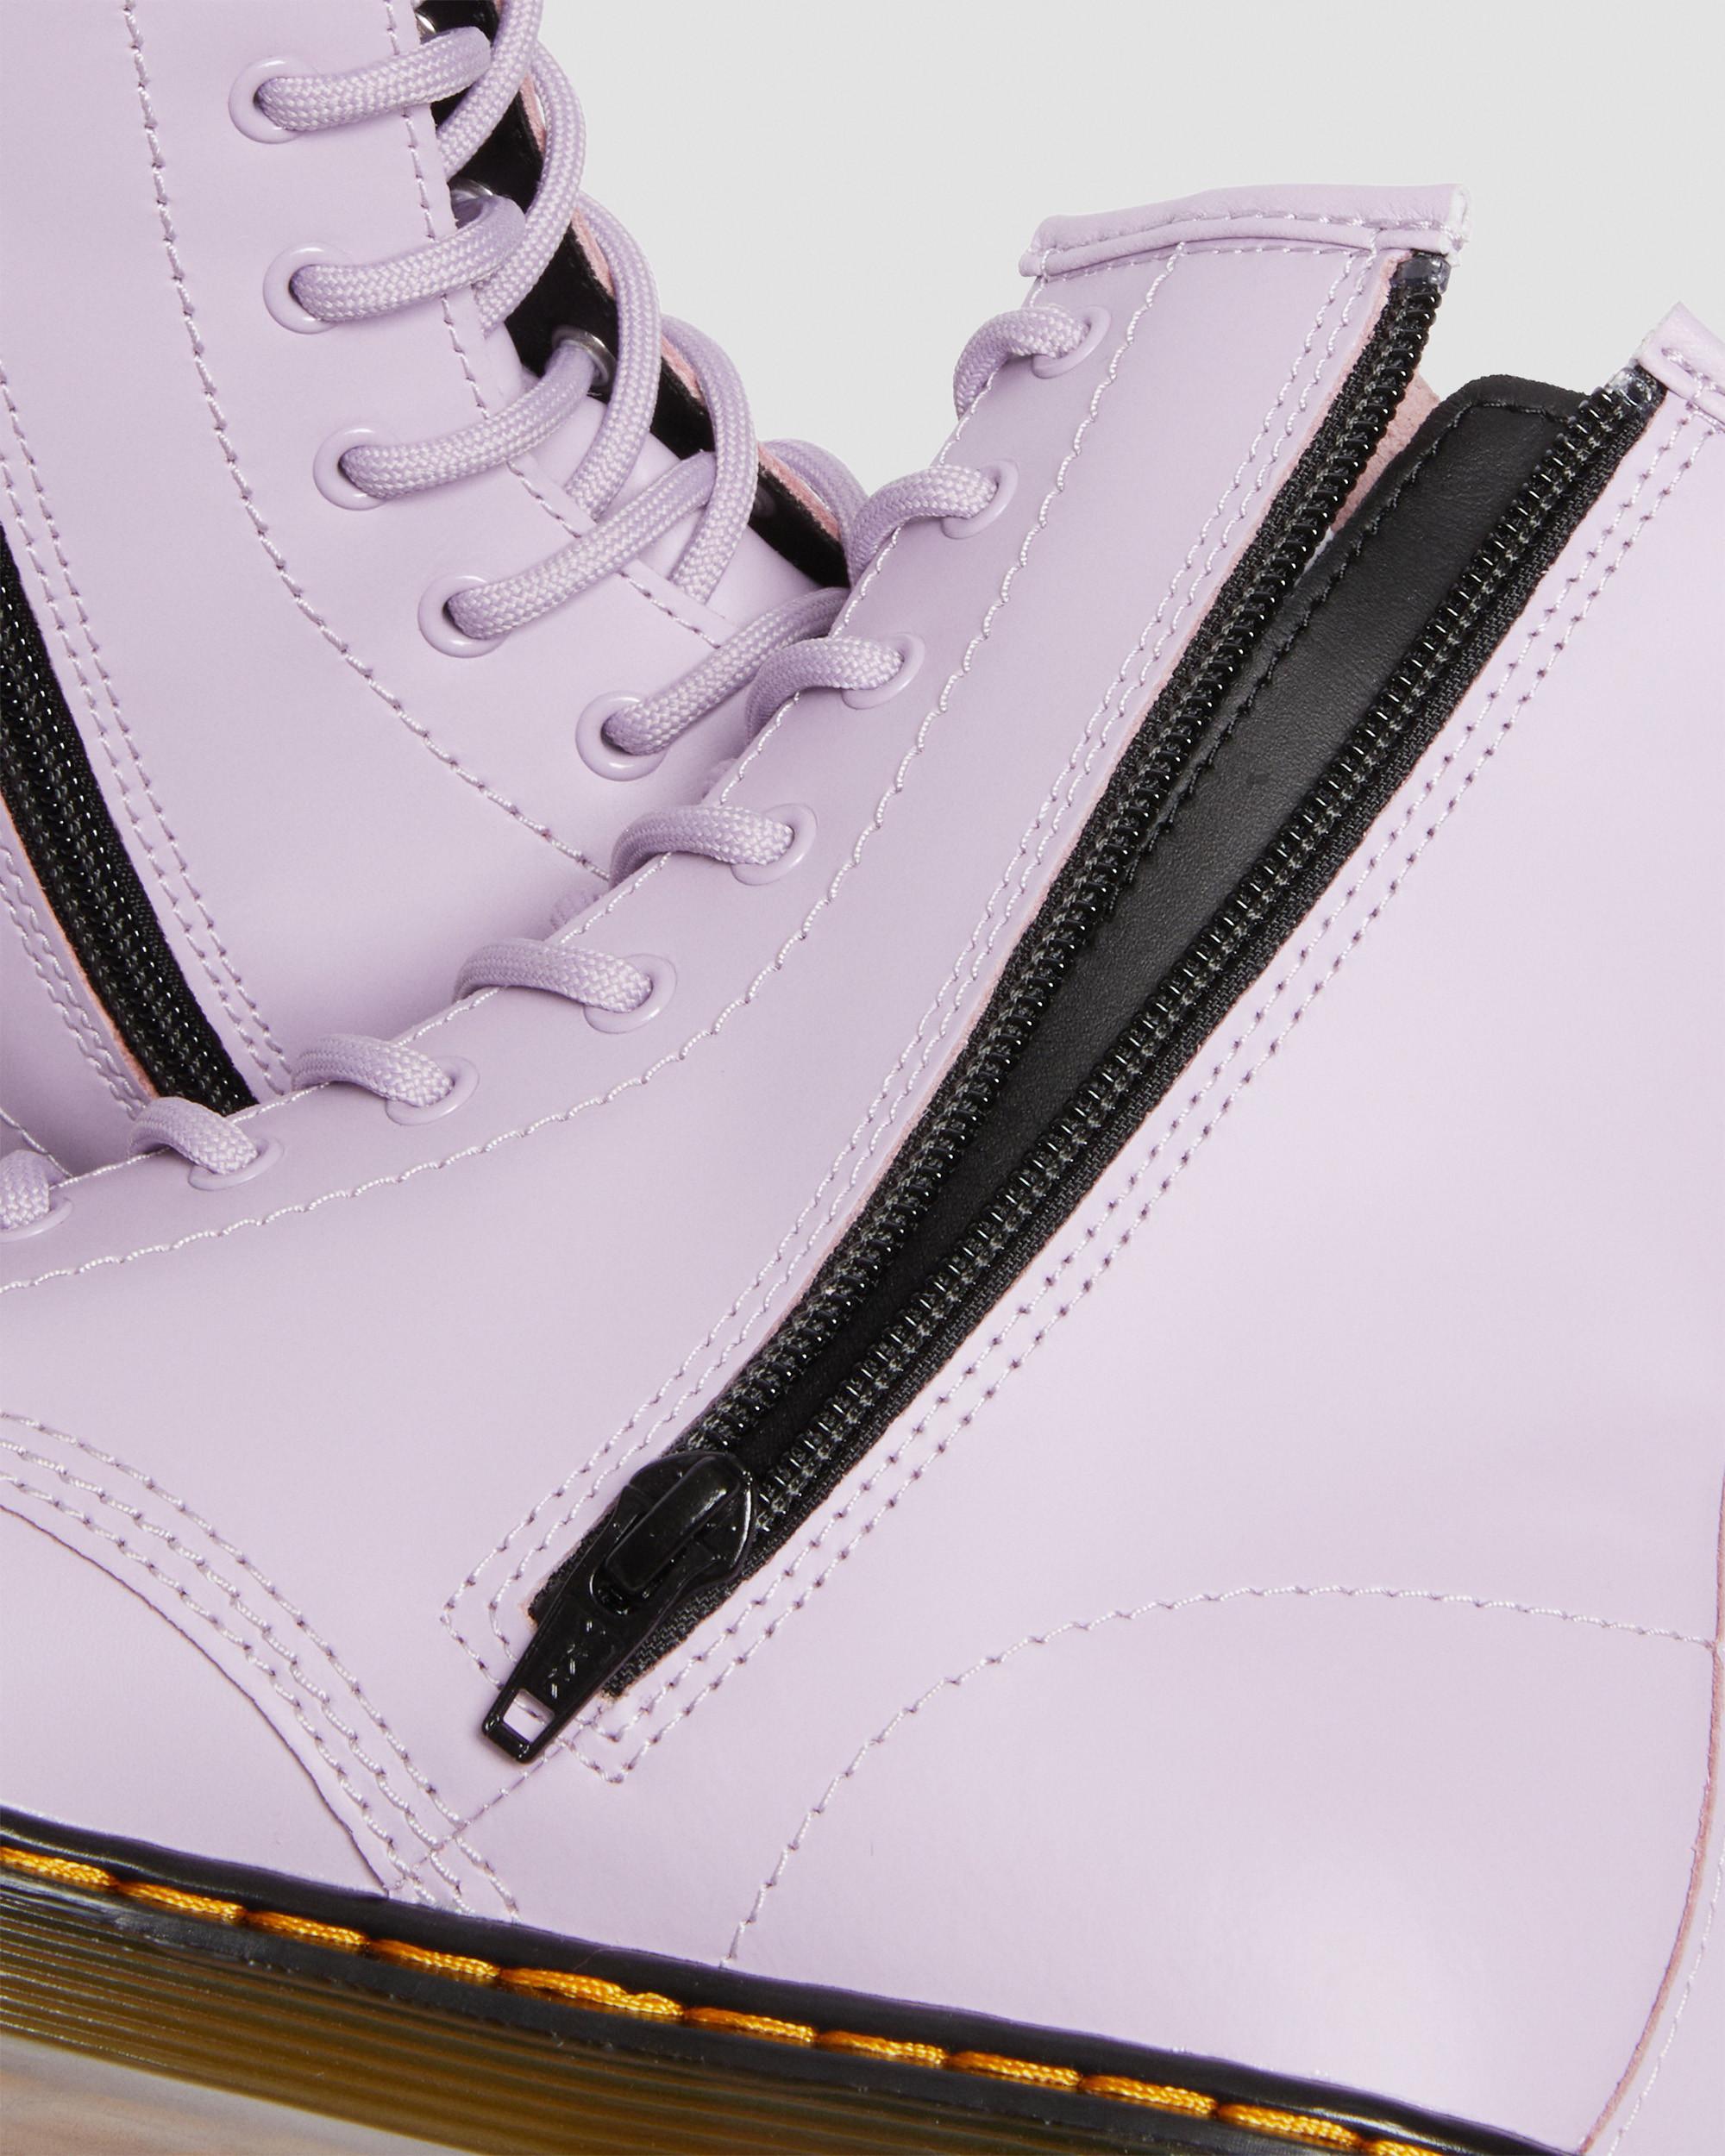 Youth 1460 Lace Leather Lilac Up | in Martens Romario Dr. Boots